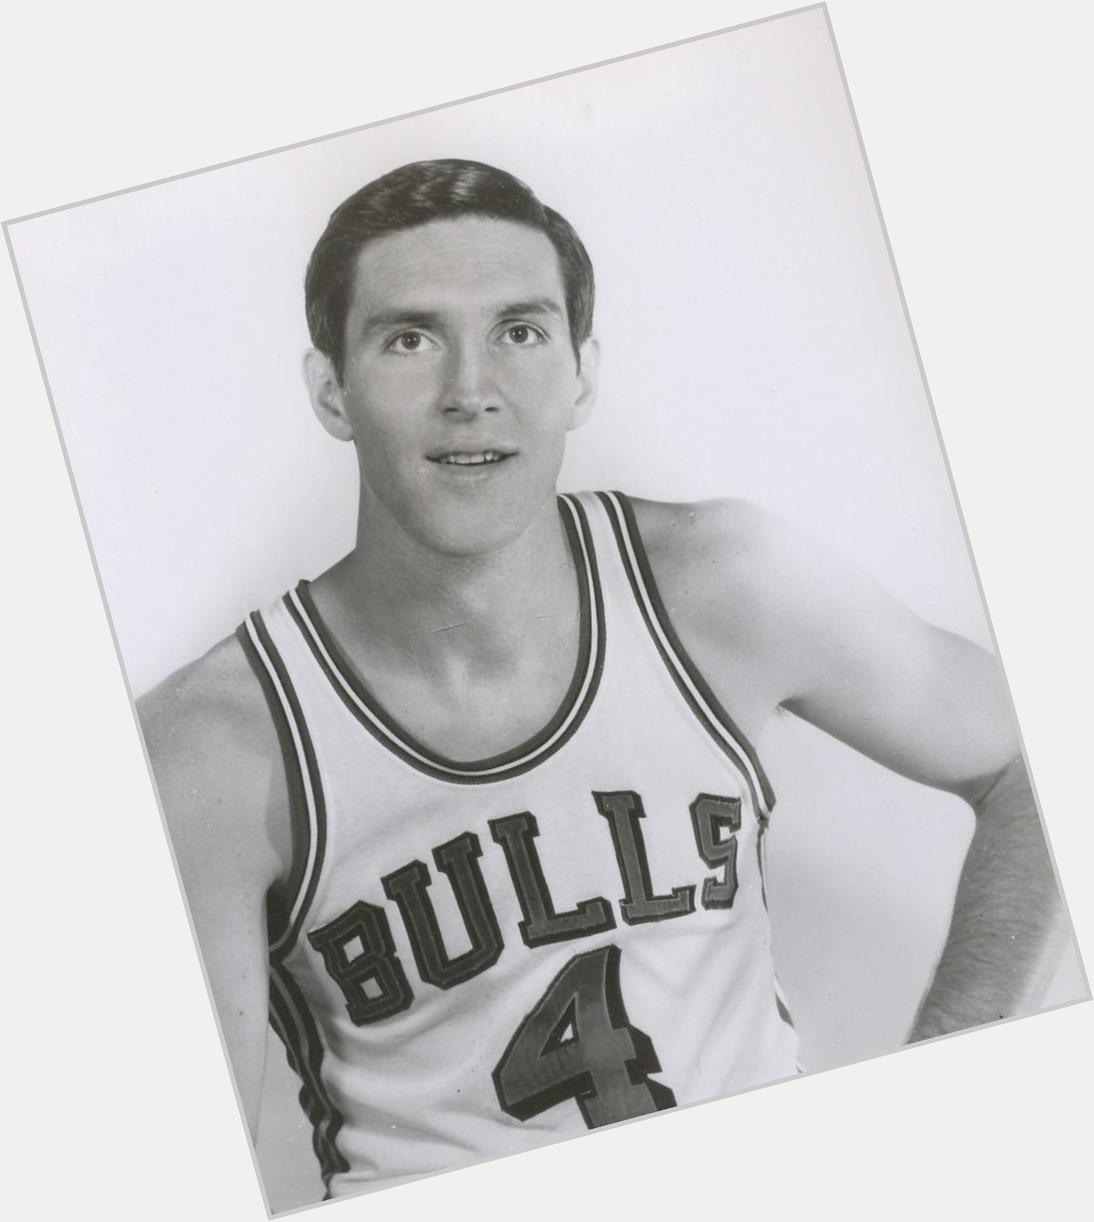 Happy Birthday to this man who epitomised grit, toughness and Chicago Bulls basketball, Jerry Sloan. 